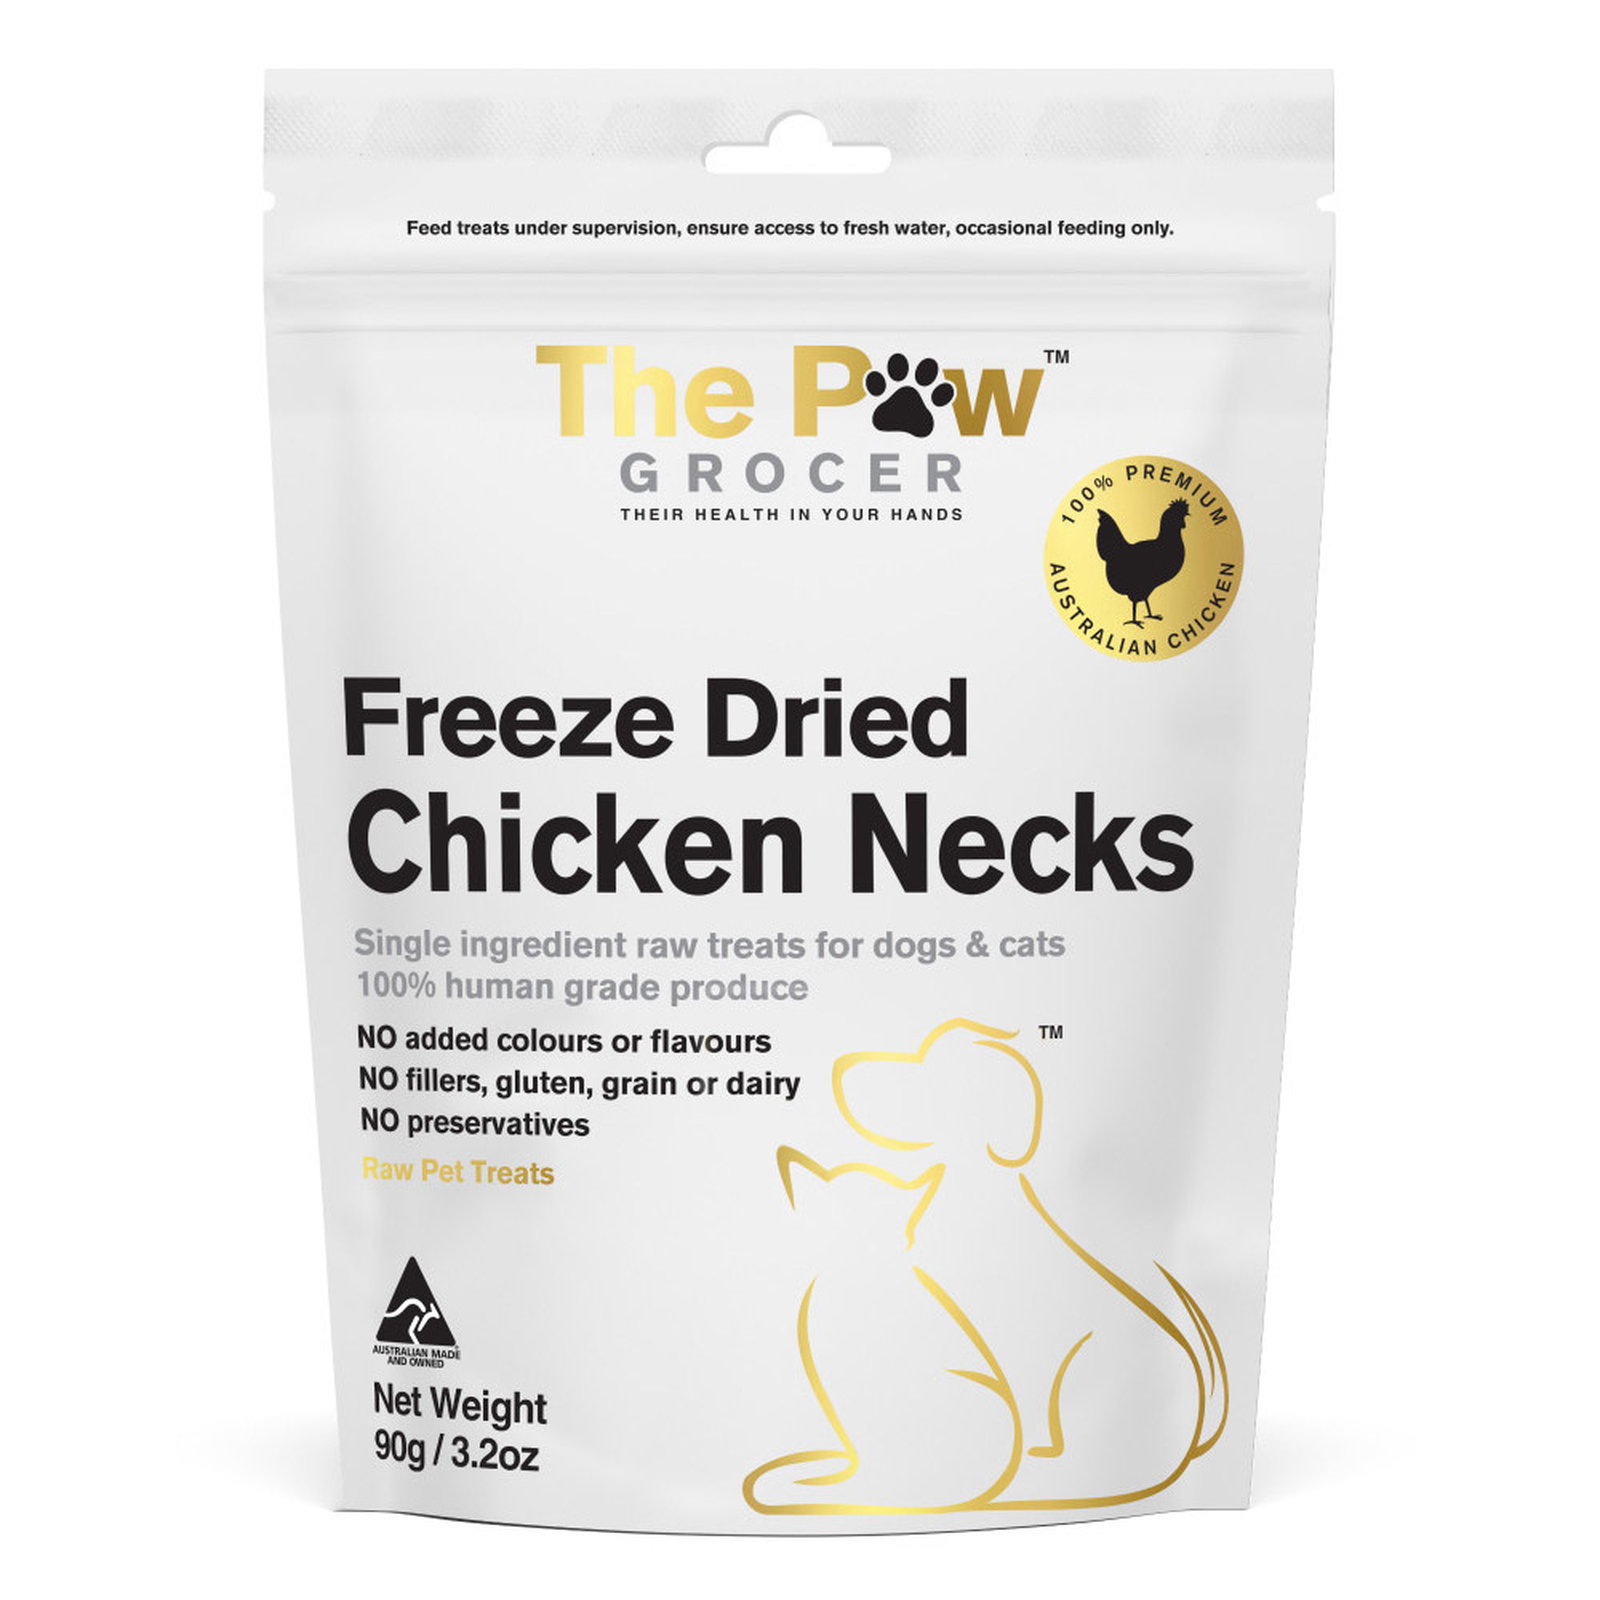 The Paw Grocer Freeze Dried Chicken Necks Dog and Cat Treats